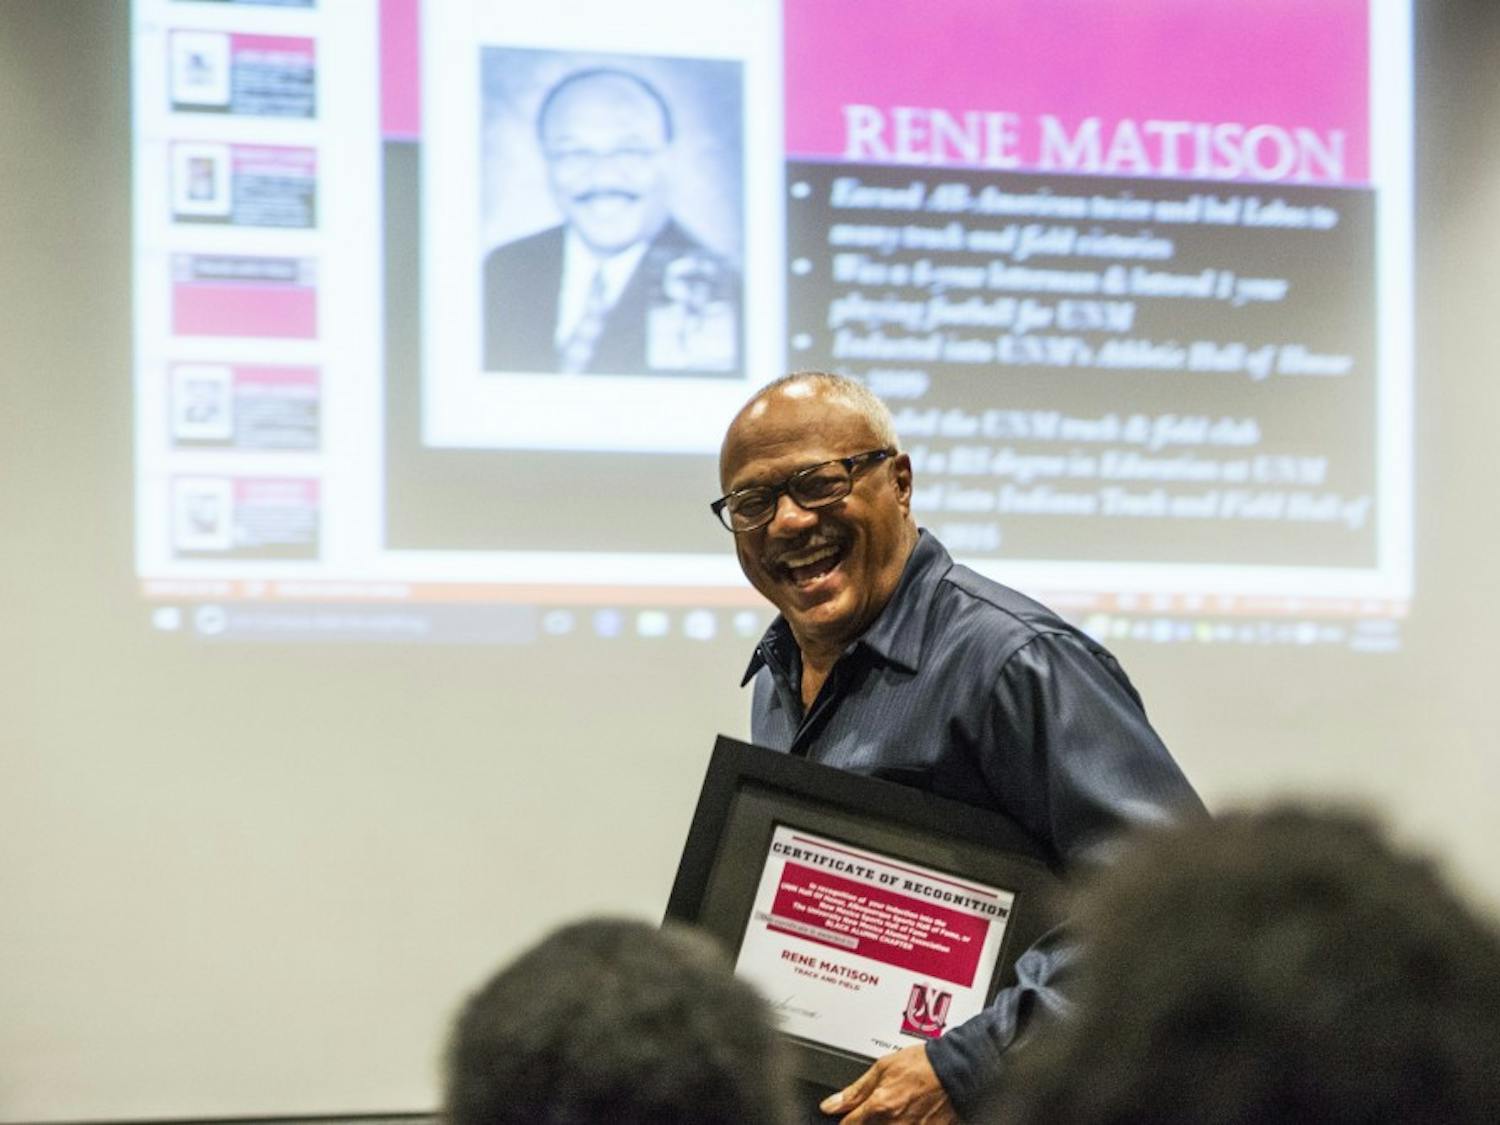 Rene Matison receives his award on Friday, Sept. 30, 2016 at the Centennial Engineering Auditorium. Matison, alongside a handful of other African-American UNM alumni, gathered for a ceremony to recognize their collegiate and athletic accomplishments.